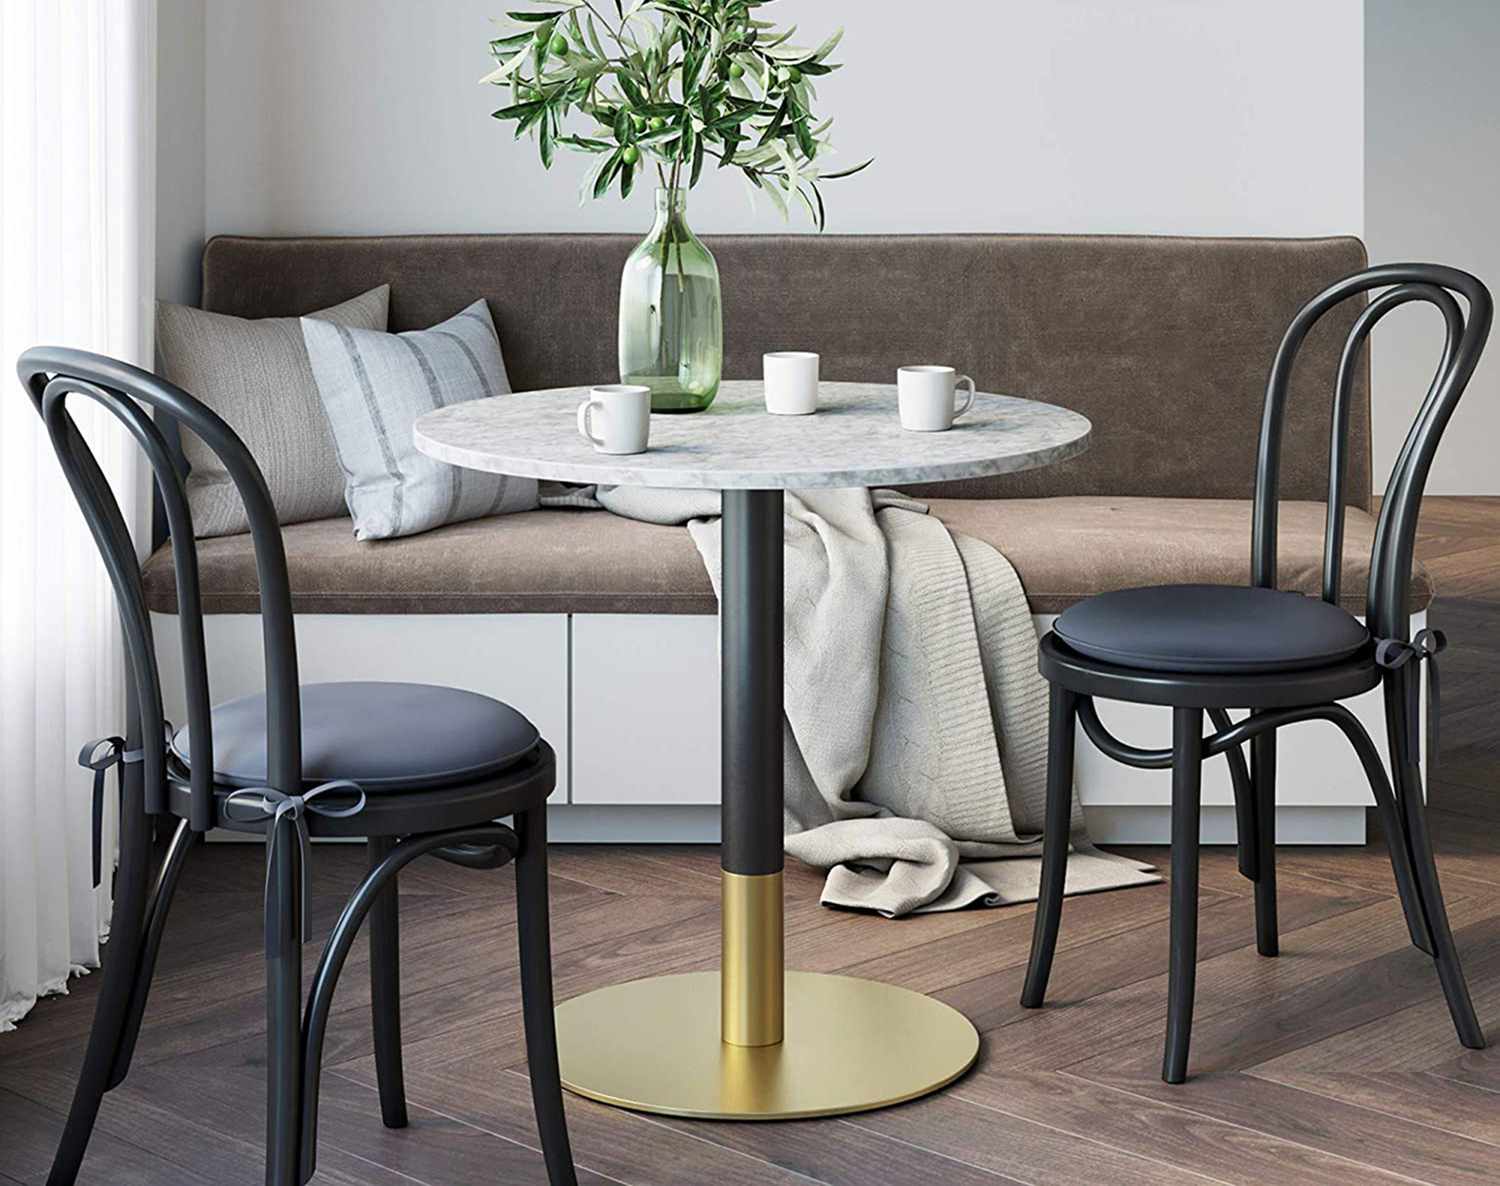 8 Best Dining Tables For Small Spaces, Round Dining Table Chairs For Small Homes